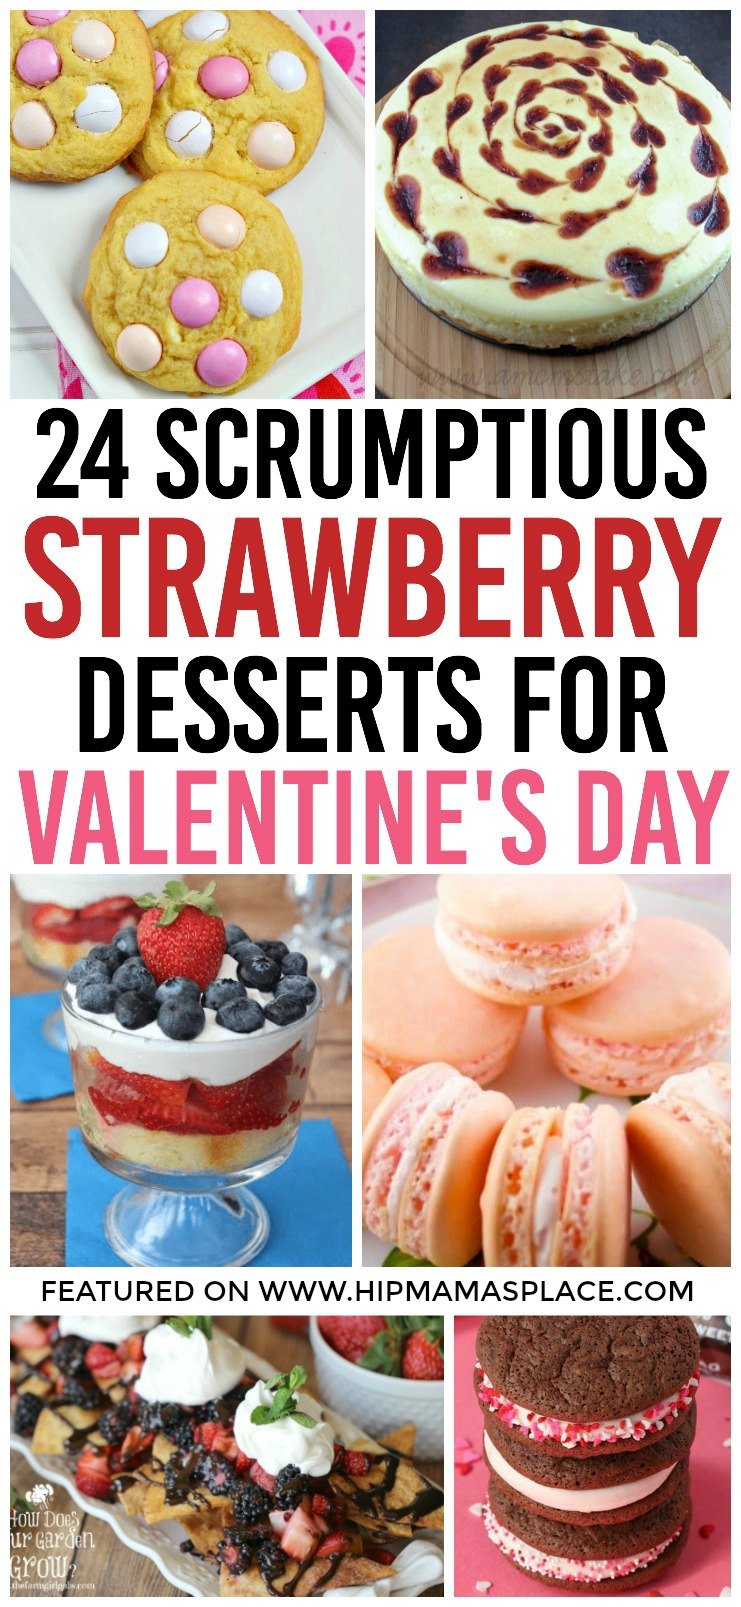 Looking for delicious treats for yourself or your sweetheart this February? Try some of these 24 strawberry desserts for Valentine's Day! #ValentinesDay #desserts #HipMamasPlace #Valentinesdesserts 